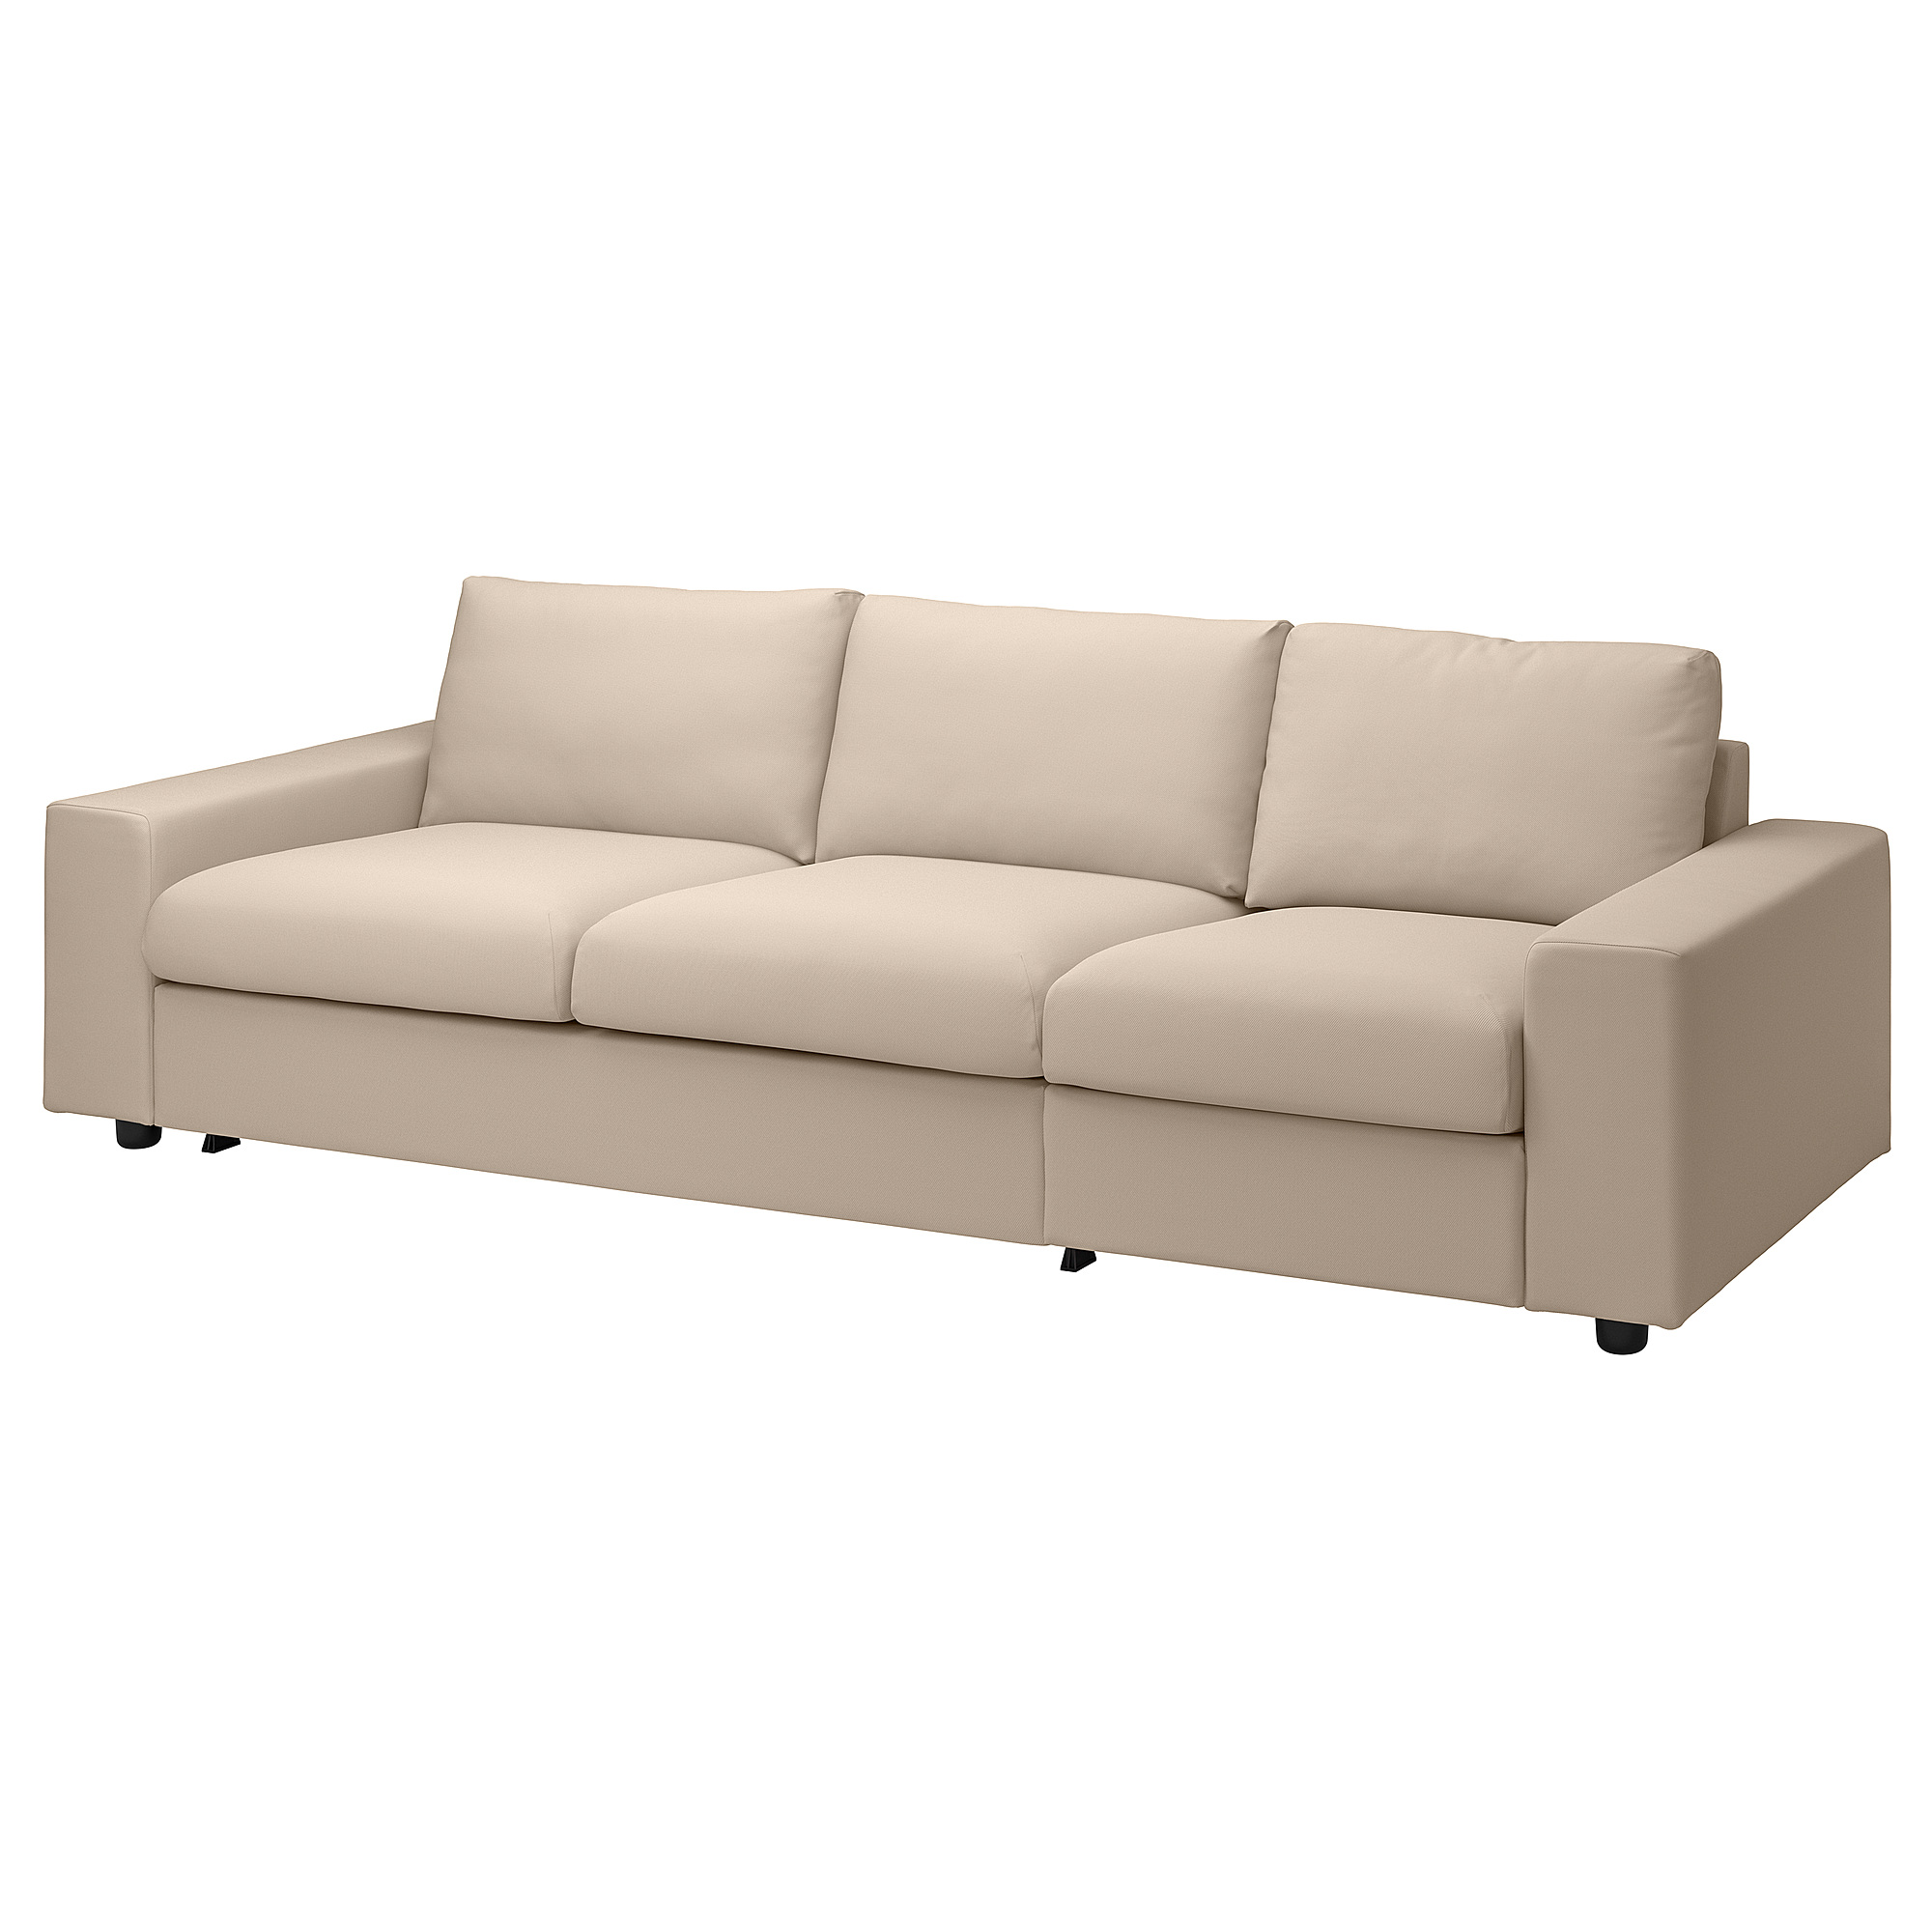 VIMLE cover for 3-seat sofa-bed